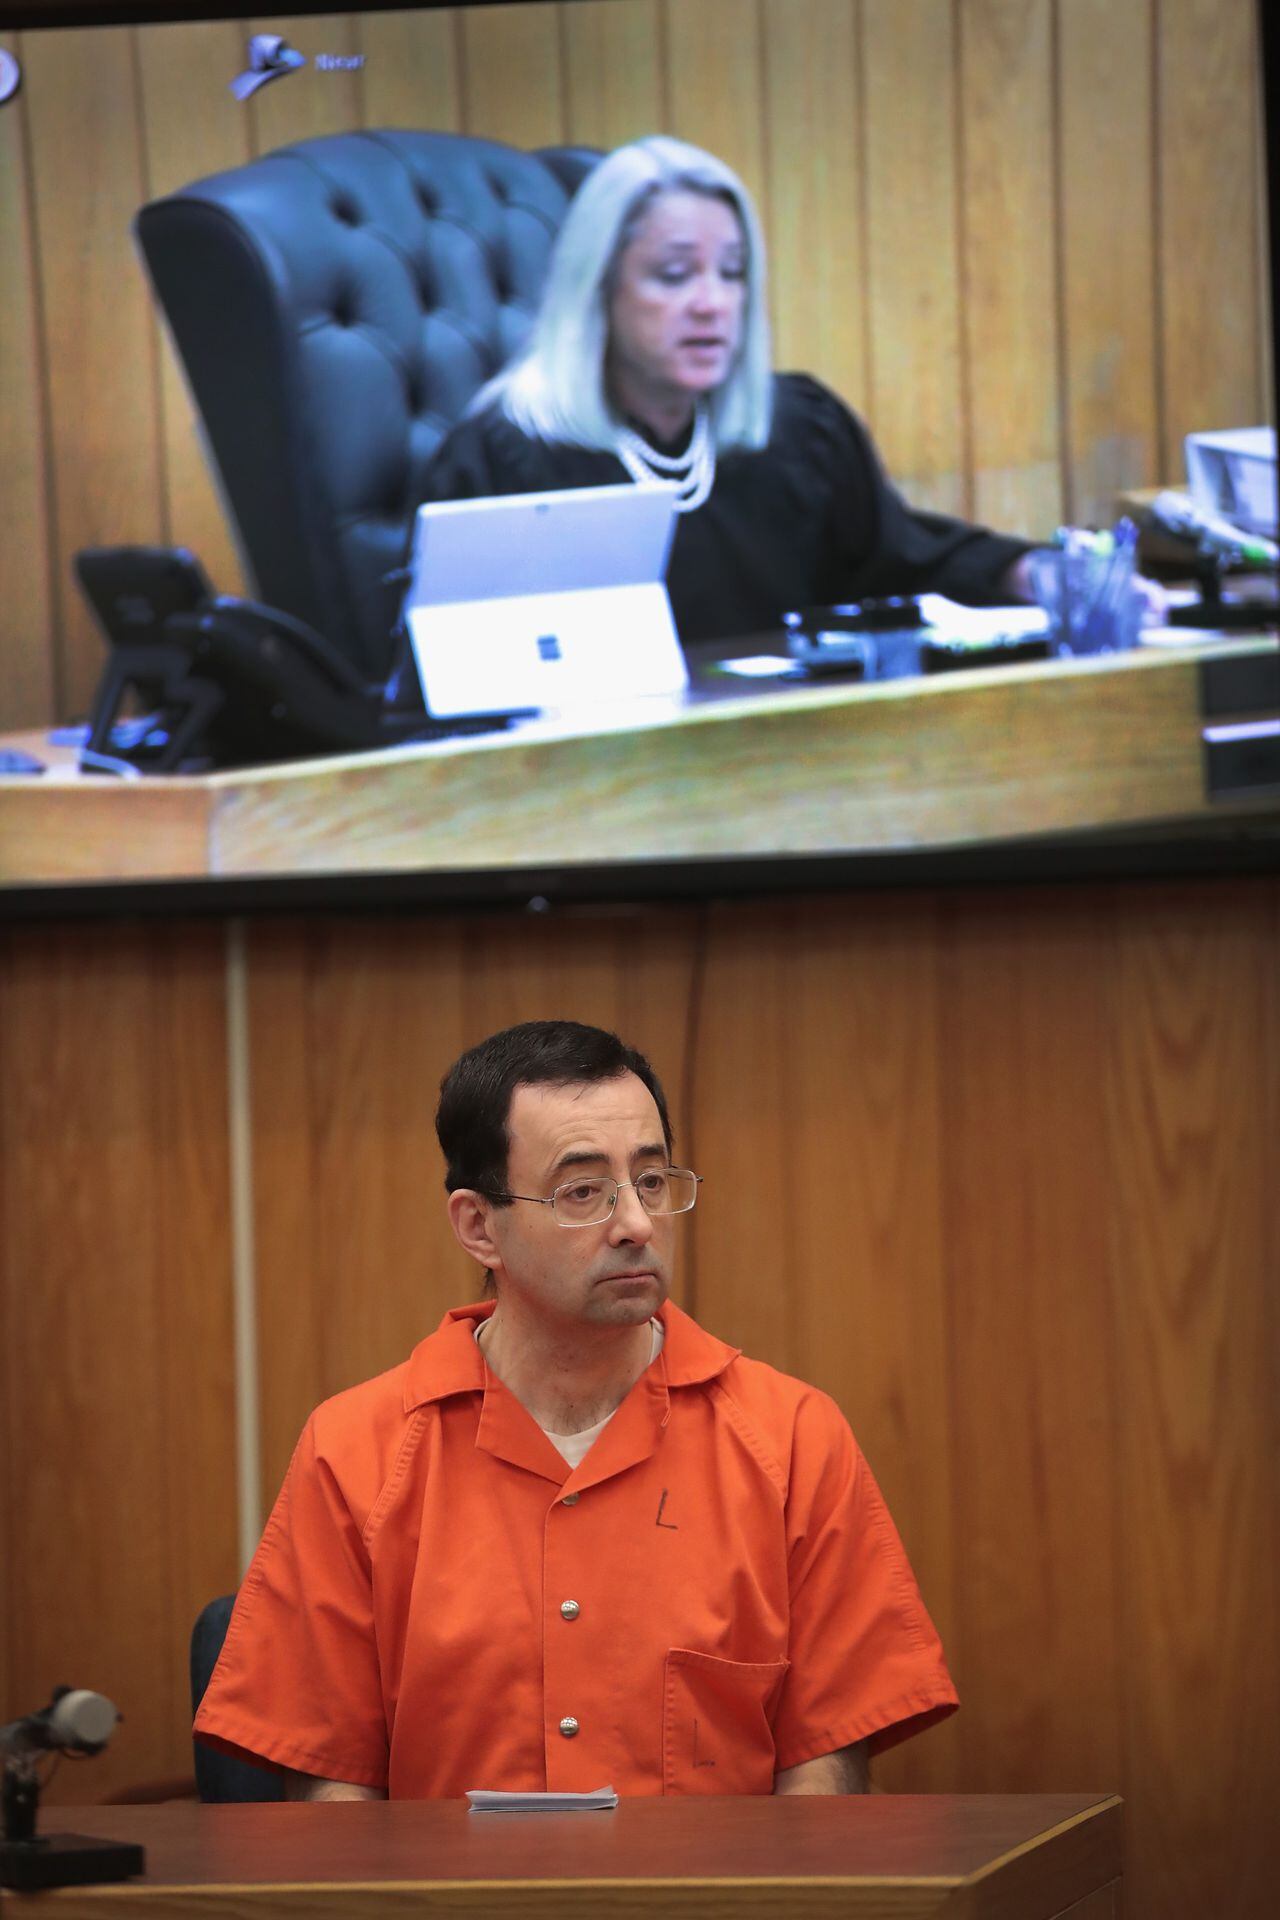 CHARLOTTE, MI - FEBRUARY 05:  Larry Nassar listens as he is sentenced by Judge Janice Cunningham for three counts of criminal sexual assault in Eaton County Circuit Court on February 5, 2018 in Charlotte, Michigan. Nassar has been accused of sexually assaulting more than 150 girls and young women while he was a physician for USA Gymnastics and Michigan State University. He is currently serving a 60-year sentence in federal prison for possession of child pornography. Last month a judge in Ingham County, Michigan sentenced Nassar to an additional 40 to 175 years in prison after he plead guilty to sexually assaulting seven girls.  (Photo by Scott Olson/Getty Images)